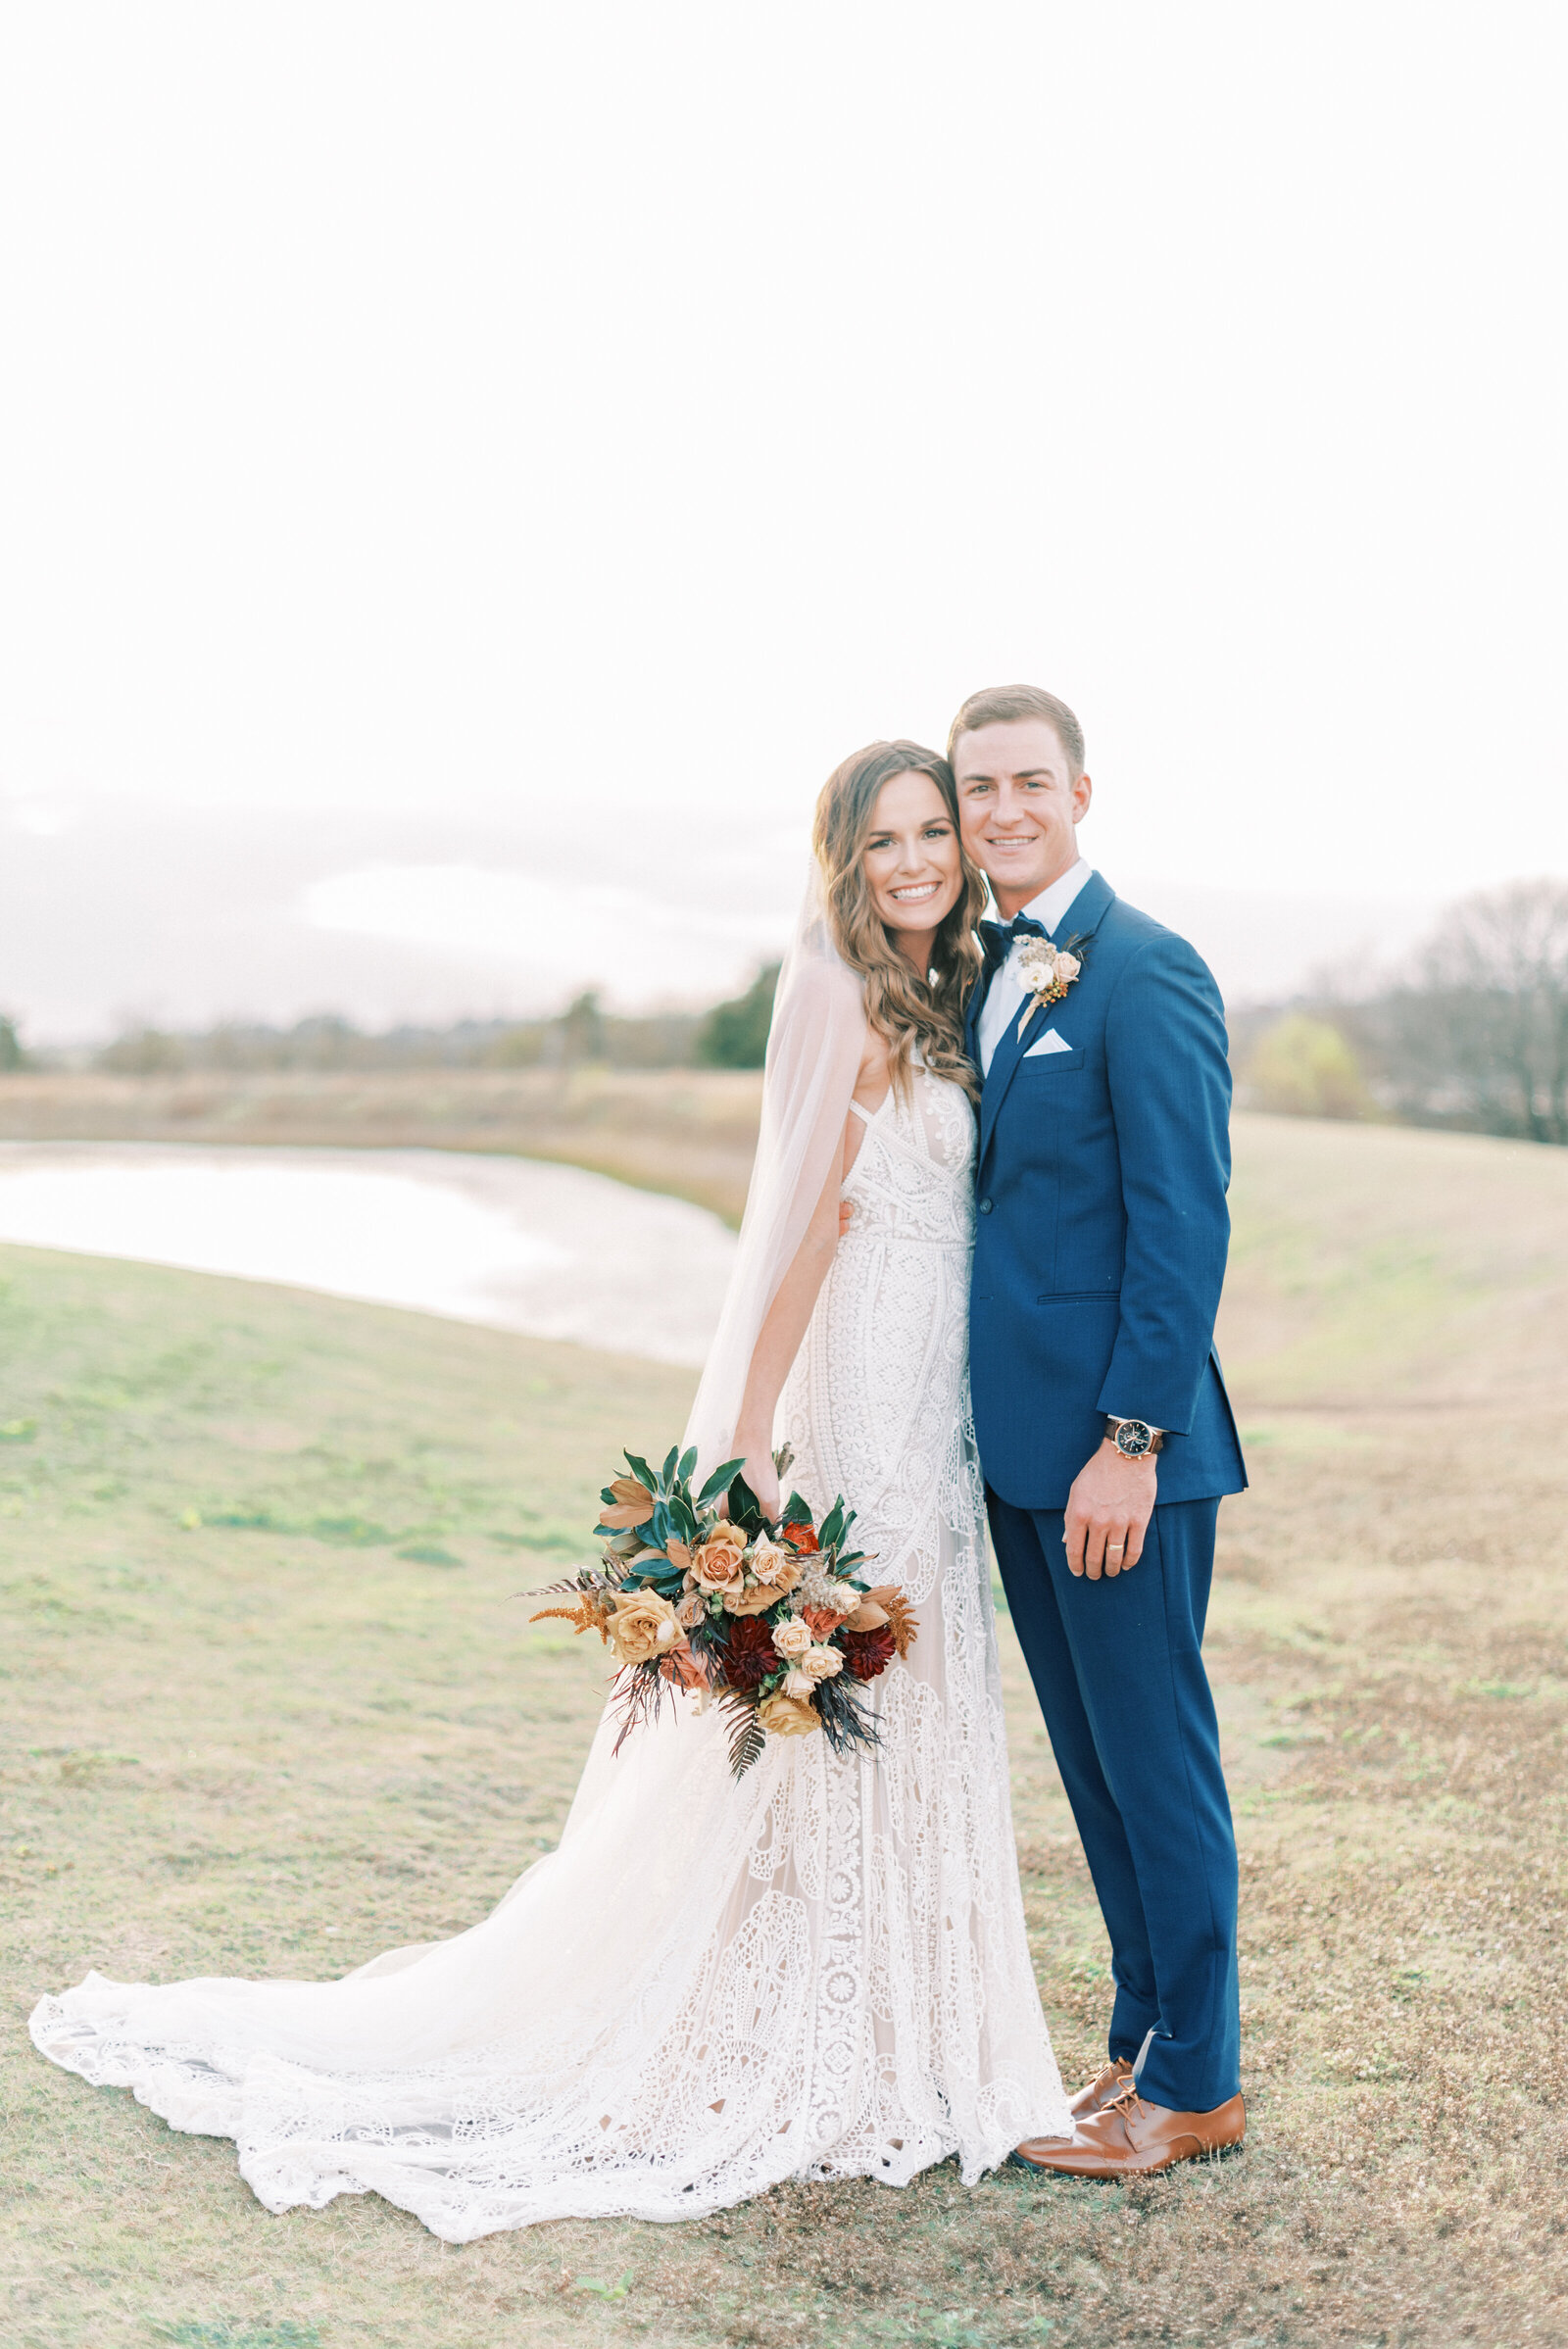 Portrait of a bride and groom in a white lace wedding gown and blue suit holding a bouquet on a field.